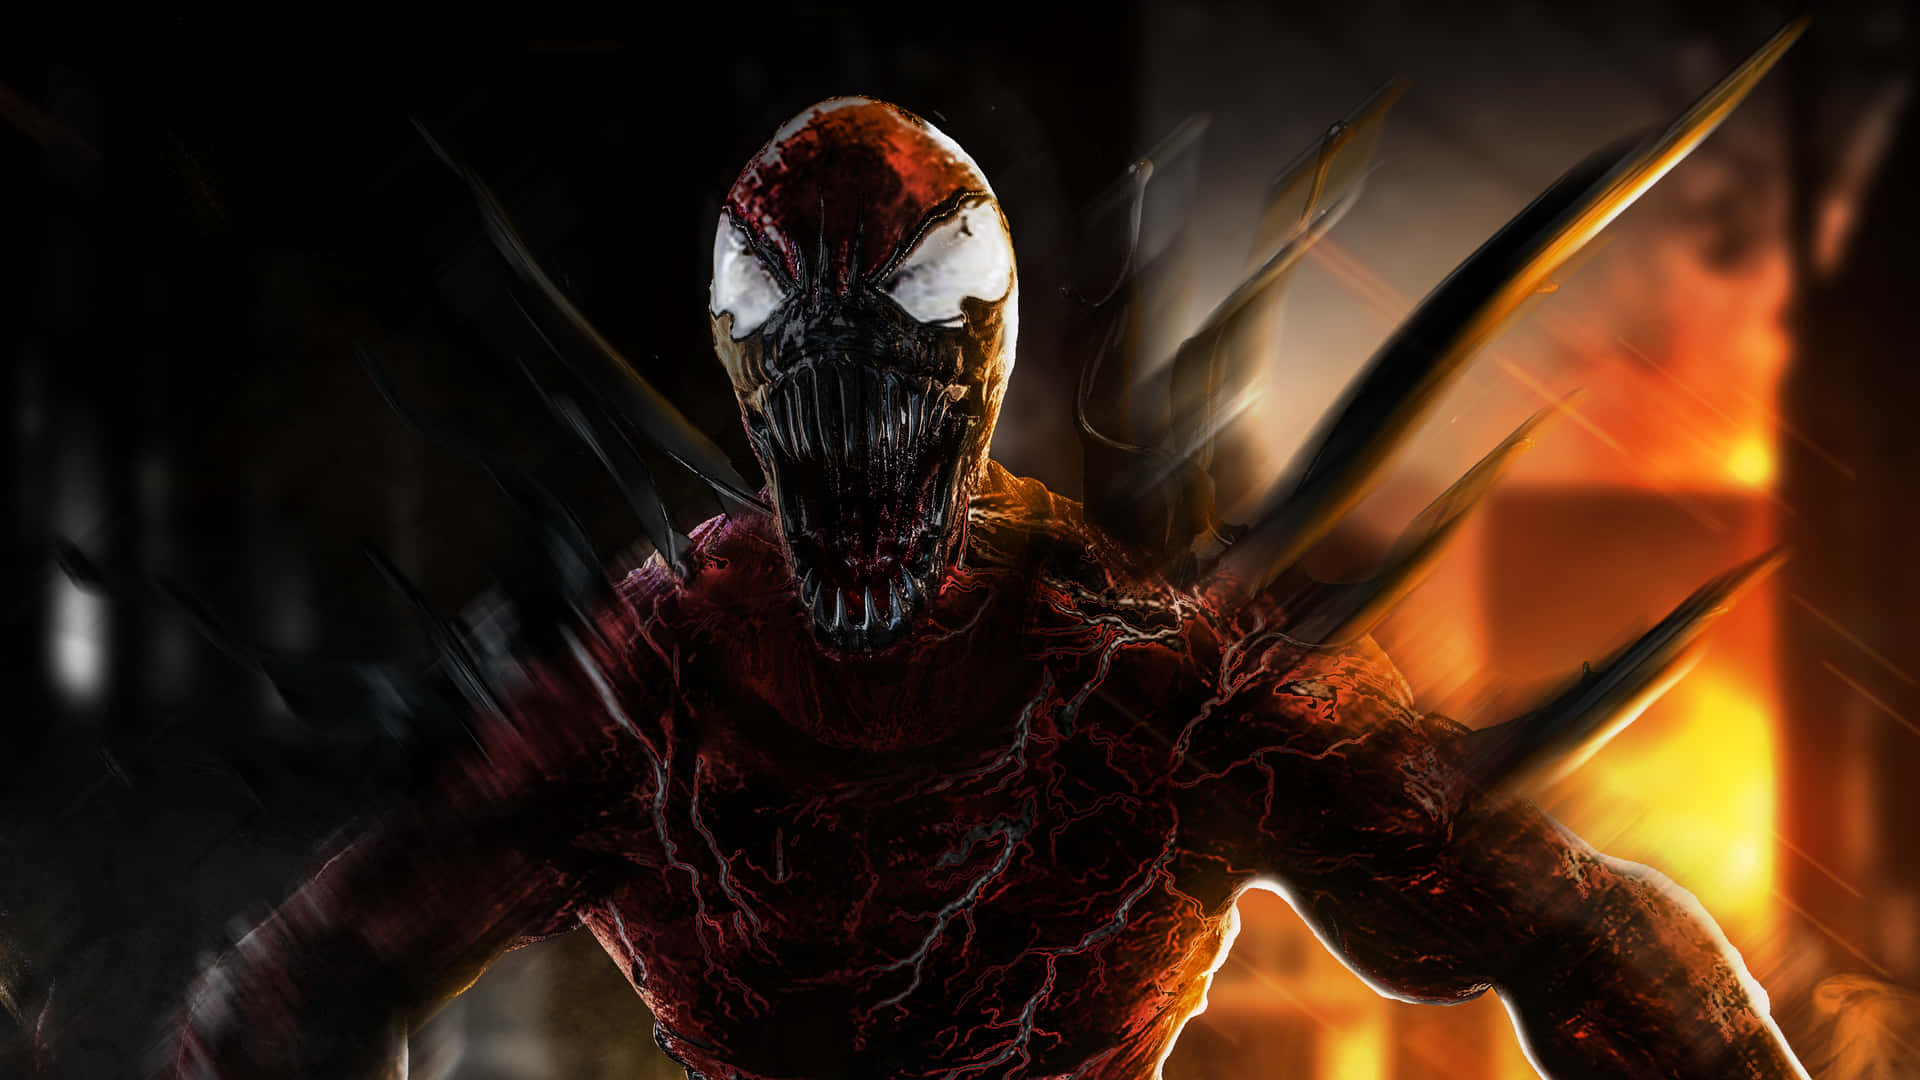 Carnage Unleashed - A Fierce Marvel Character Roaring on Dark Background